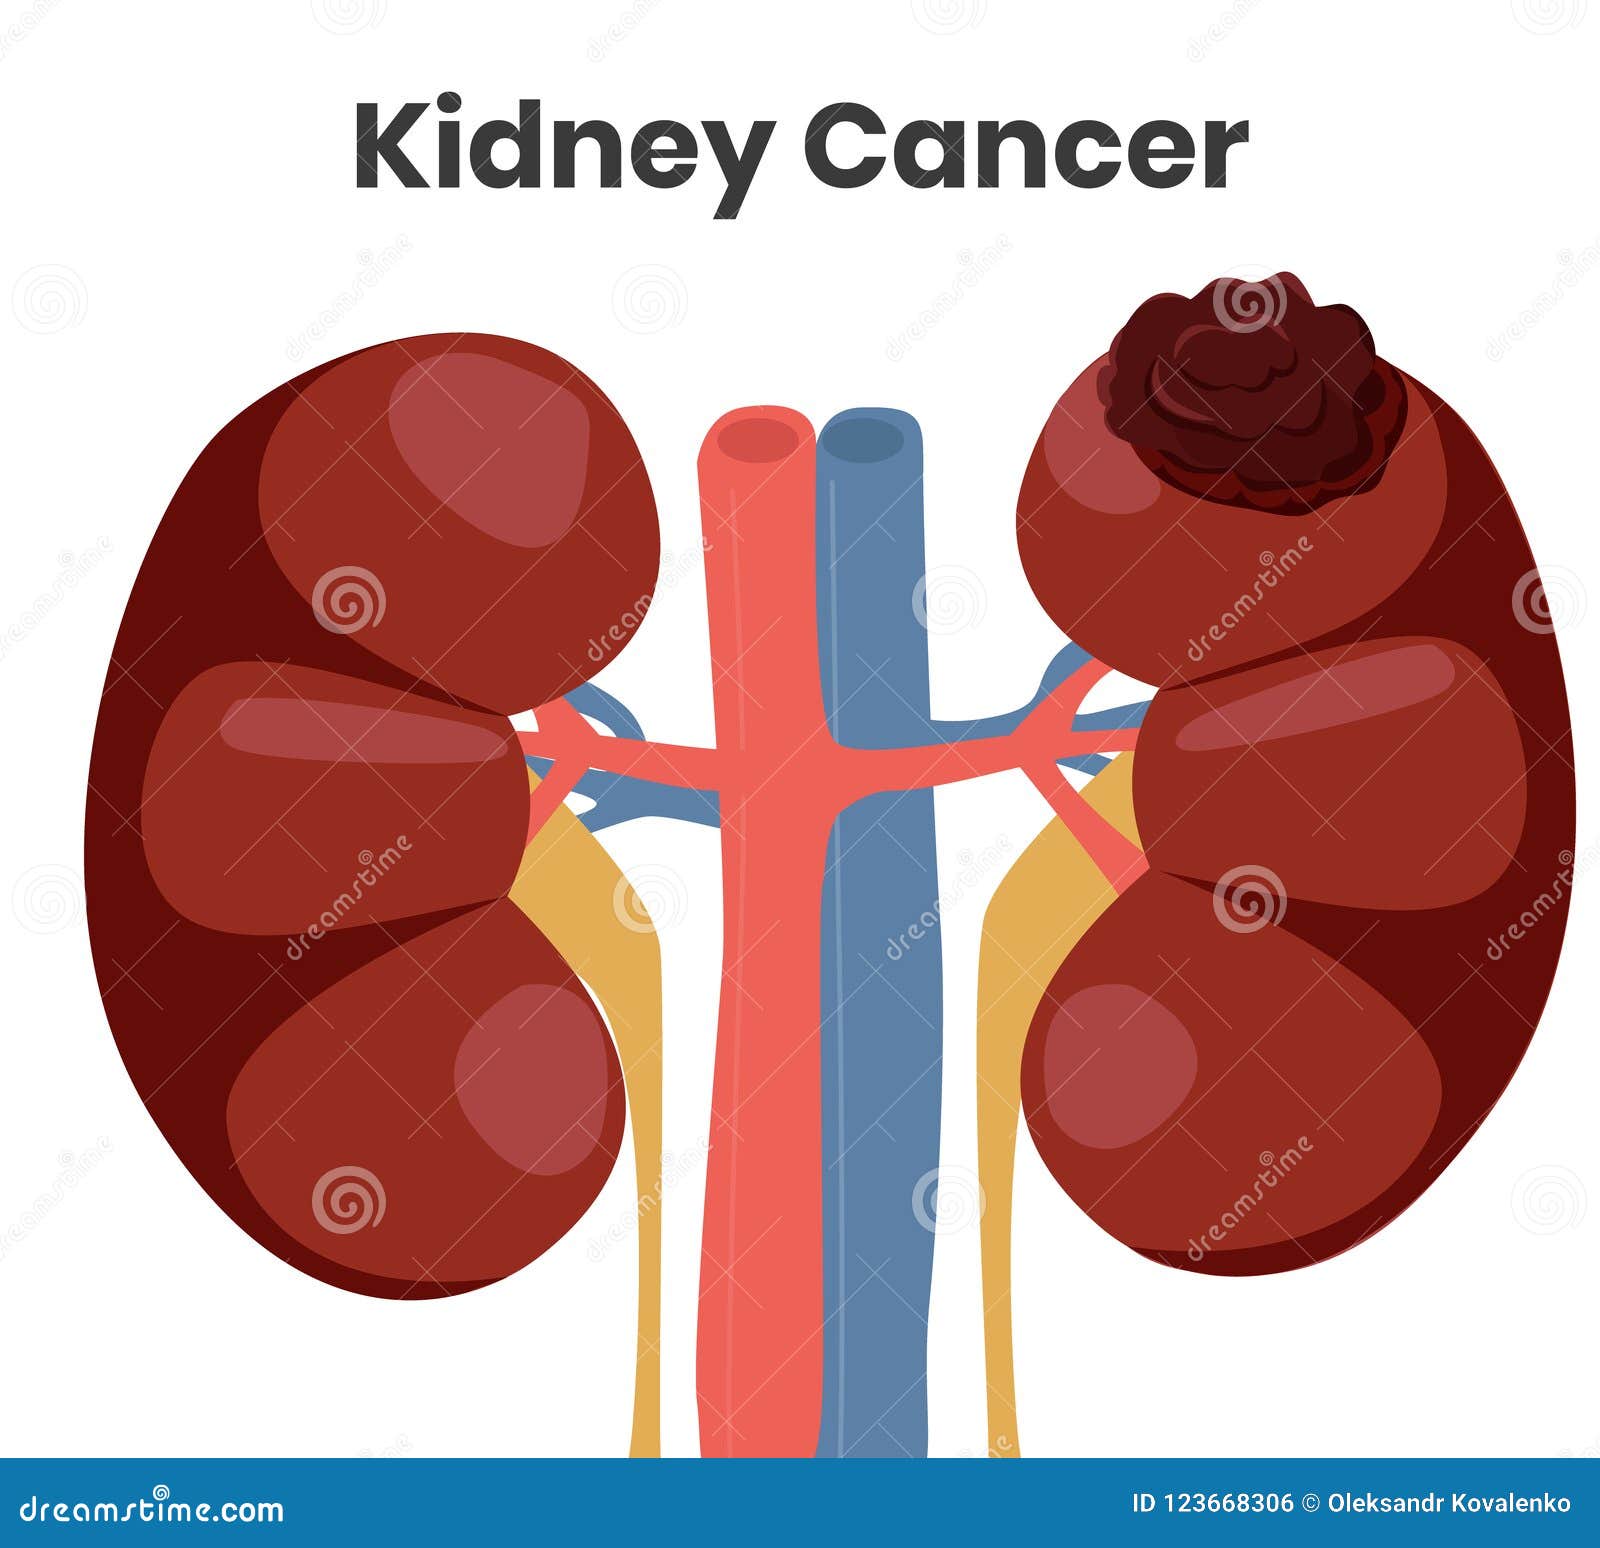   of the kidney cancer. the tumor is affecting left kidney while right kidney is normal